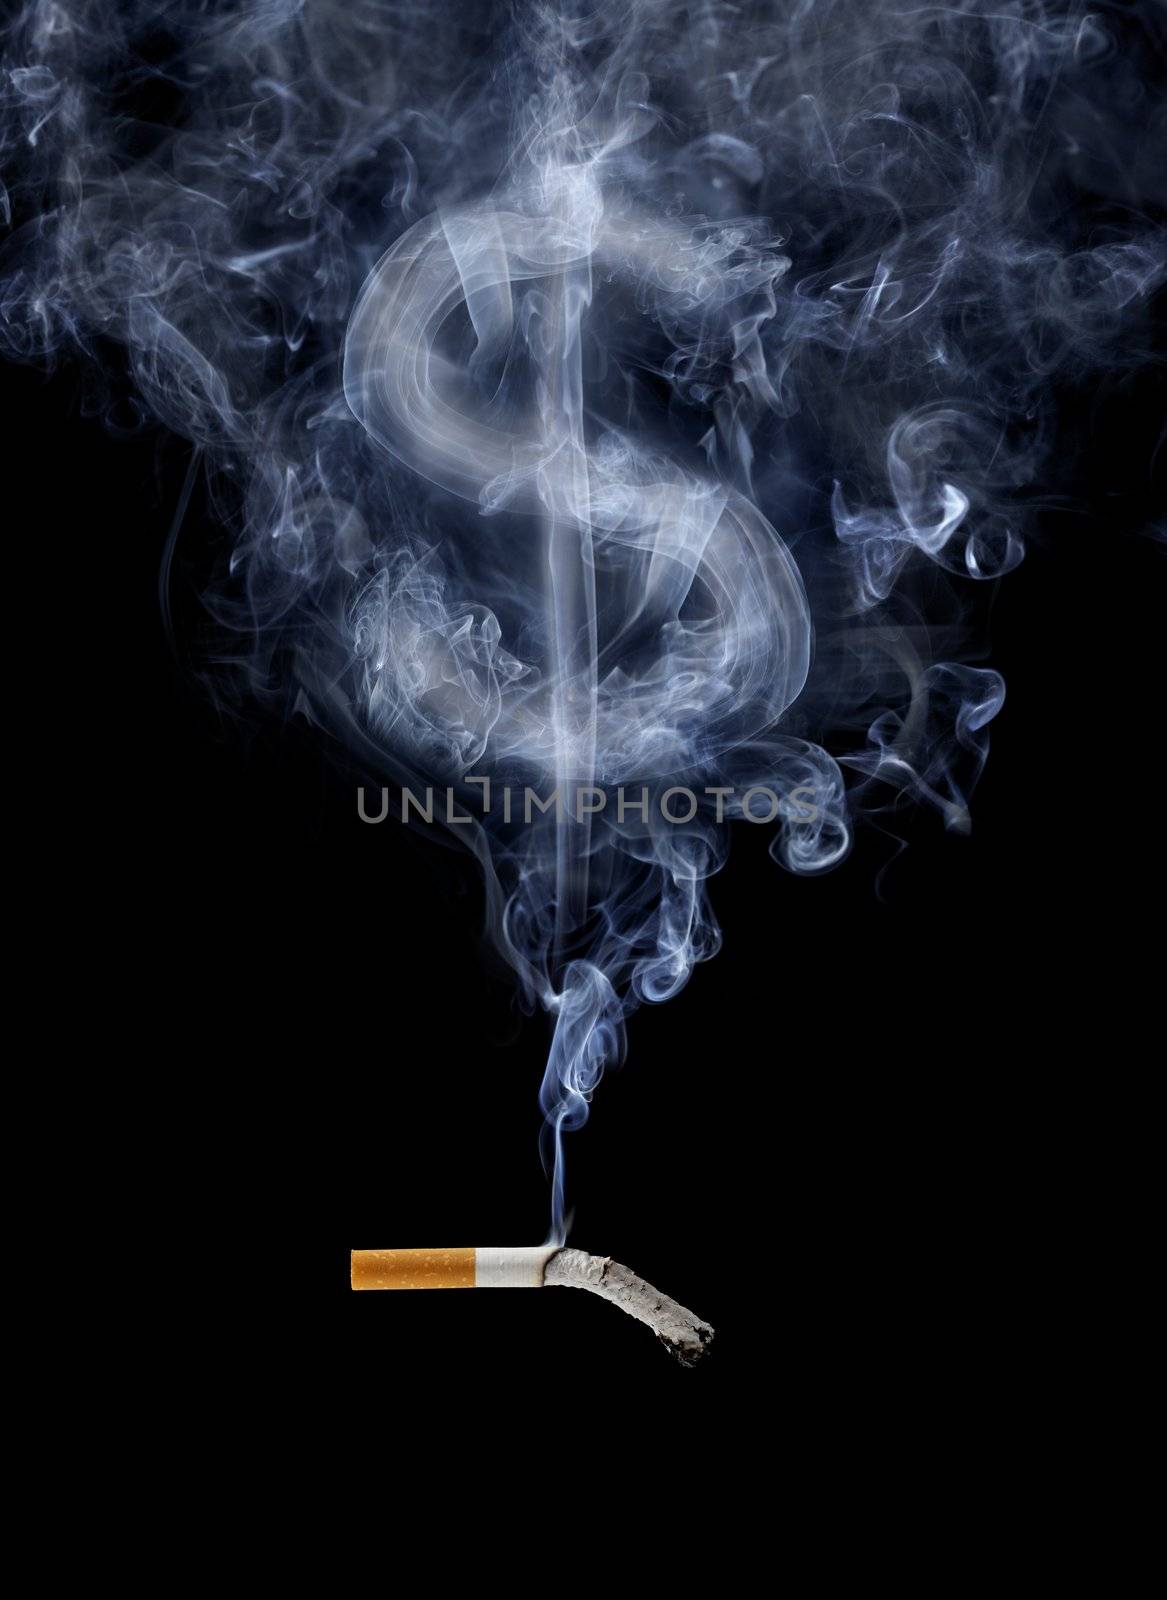 Cigarette with smoke shaped like a dollar sign.